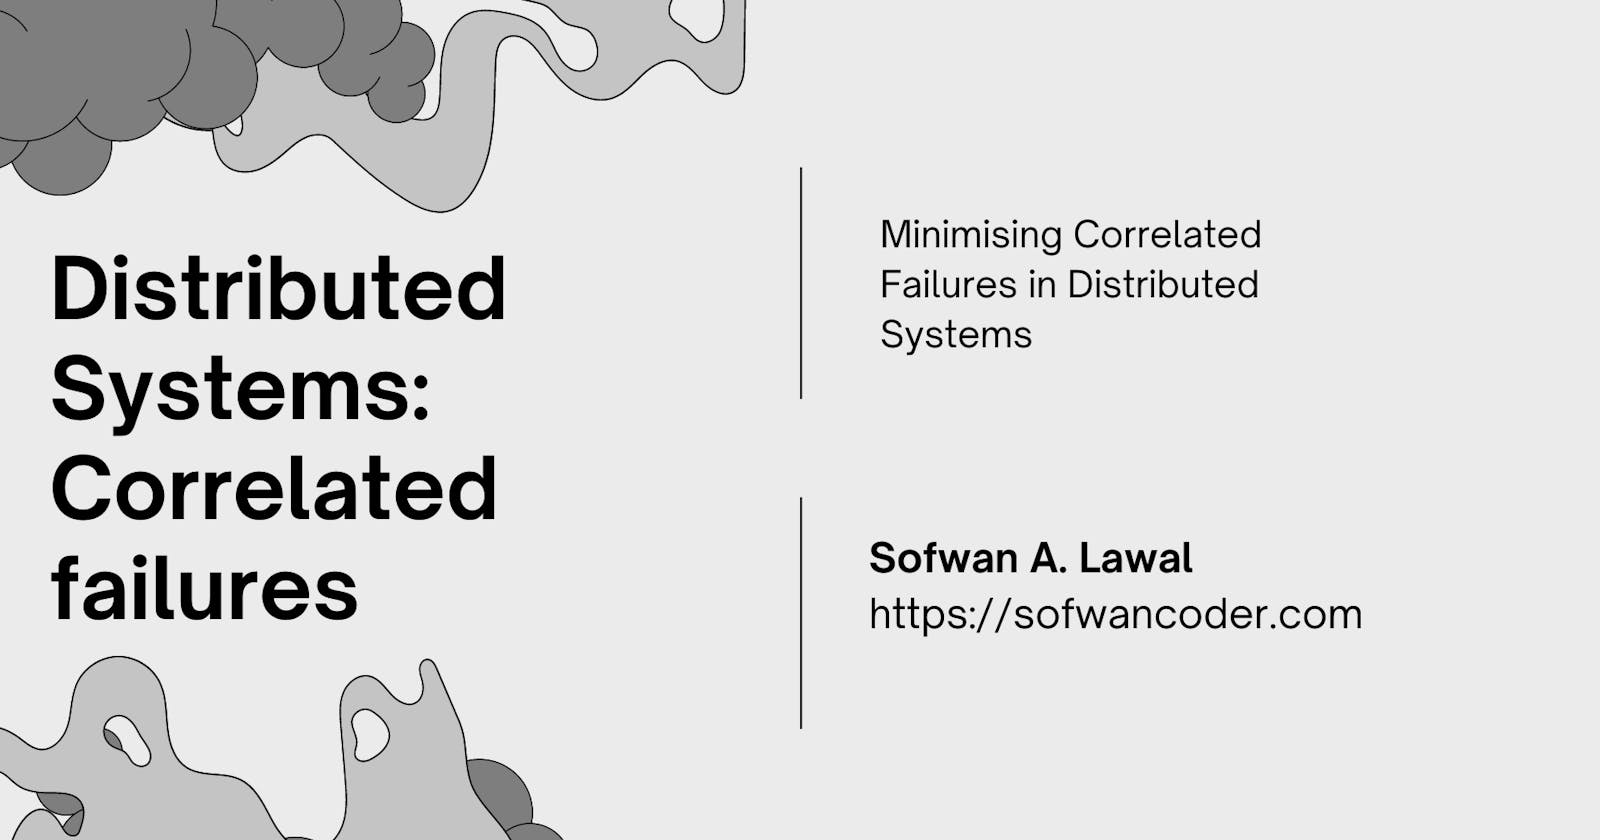 Minimising Correlated Failures in Distributed Systems